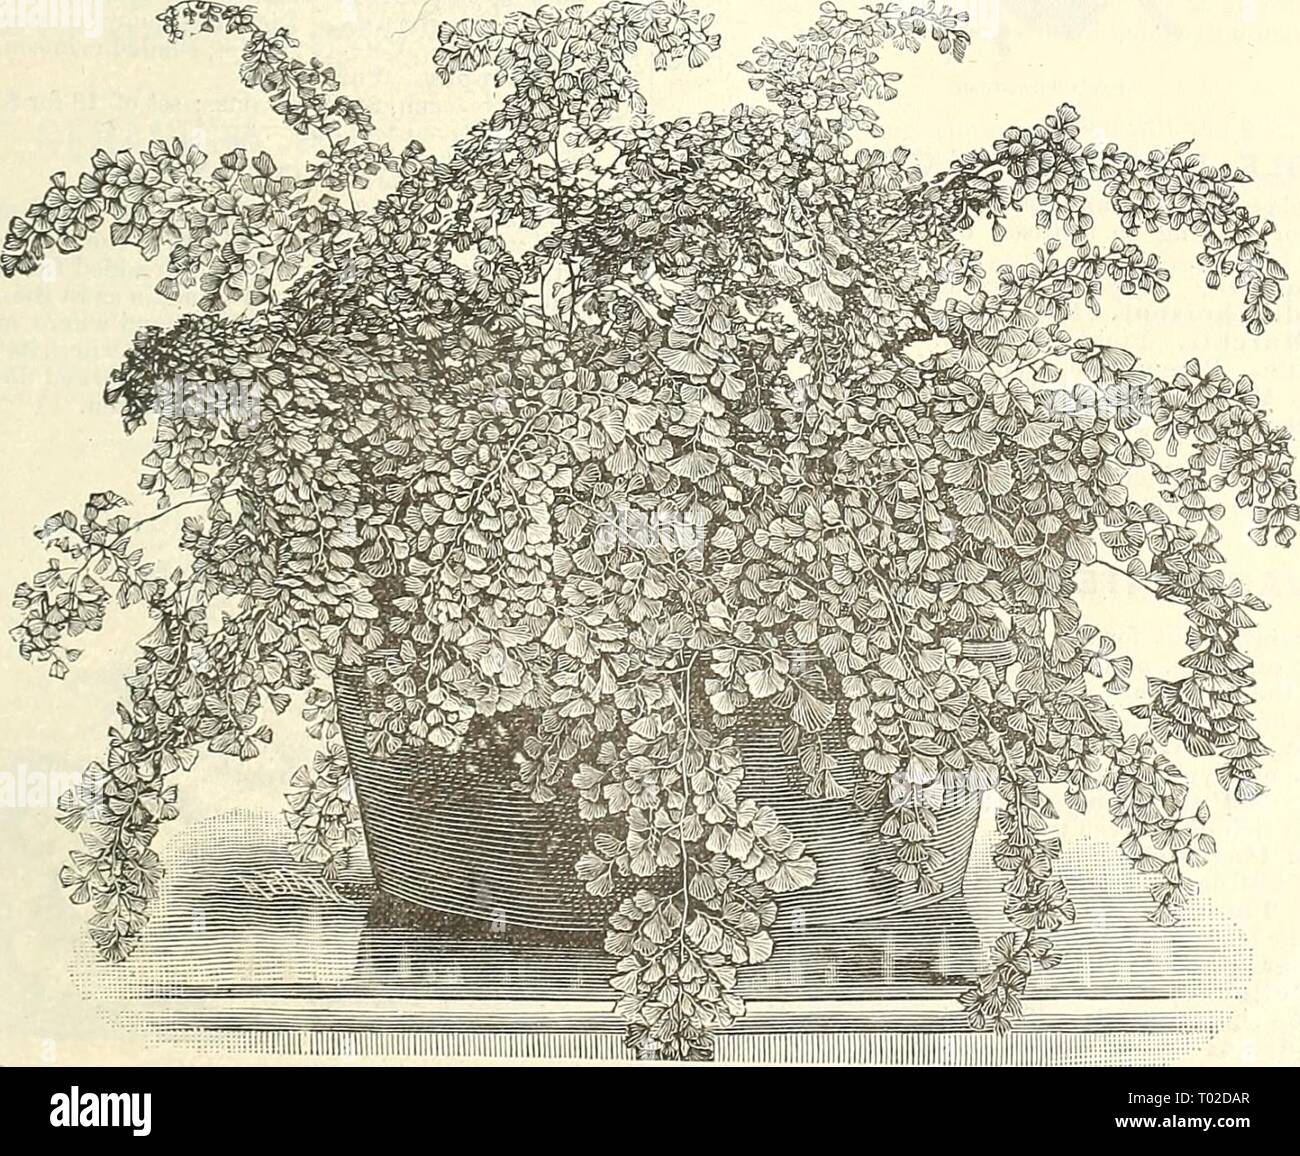 Dreer's garden calendar : 1891 . dreersgardencale1891henr Year: 1891  FOR GARDEN AND GREENHOUSE. Ill FERN S—Continued. Actiniopteris Radiata. A pretty, small tufted species, not uulike iu growth to a miniature Fau-Palm ; tliis species requires a liigh temperature to be well grown. 50 cts. Asplenium Belaiigeri. Au easy growing species, with pretty divided pinnas. 25 cts. Alsophila Australis. Australian tree-fern, a very rapid growing species. 25 cts., 50 cts. and $1.00 each. Ptcris Tricolor. A beautiful variety, with ])retty variegated foliage. Aneiiiidicton Phyllitides. 25 cts. Blechuuin Brazi Stock Photo